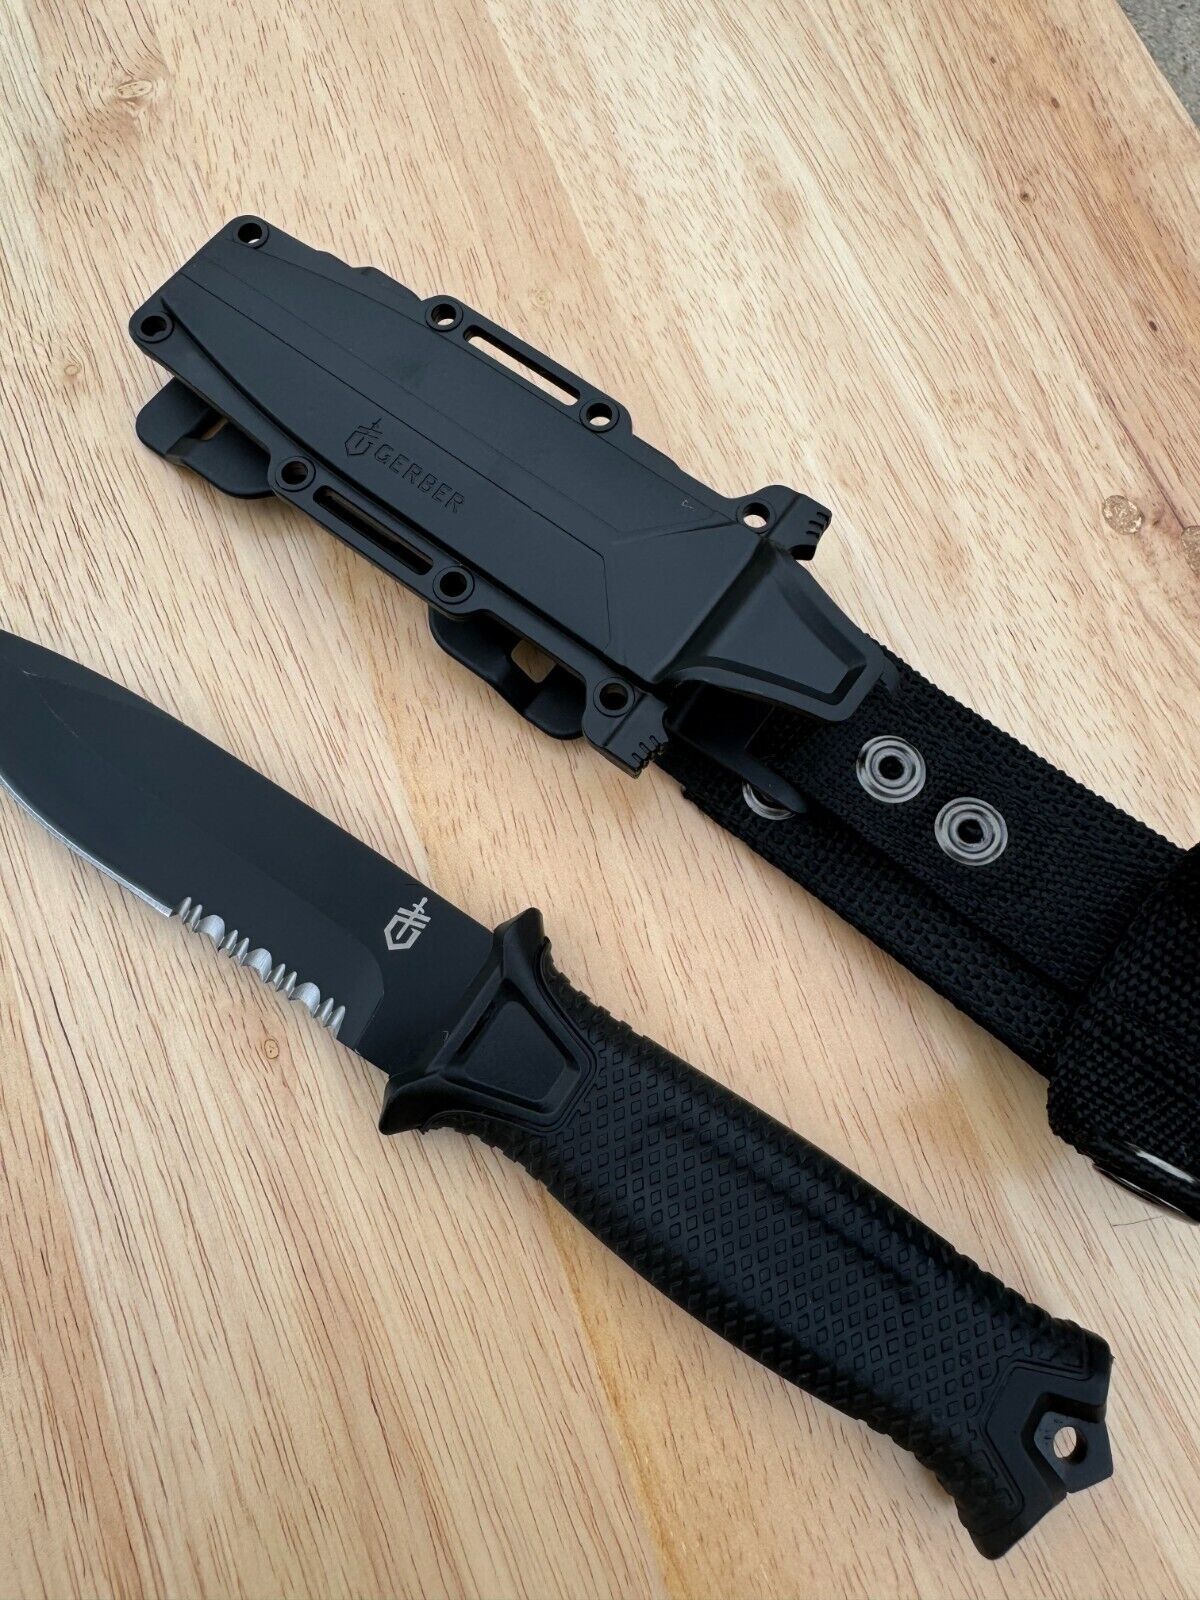 Gerber Gear - Fixed Blade Tactical Knife for Survival Gear  Black. Serrated Edge